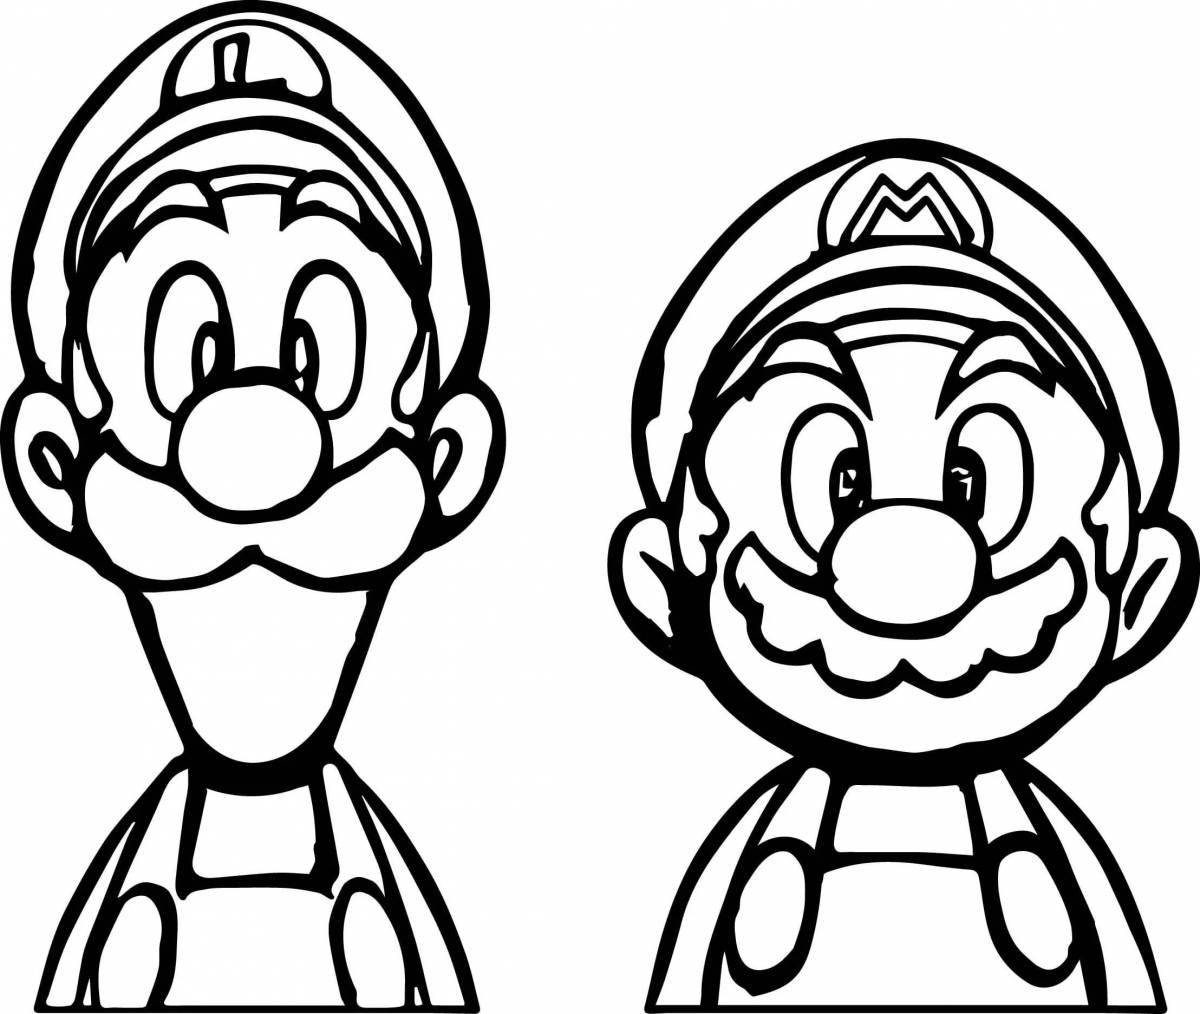 Coloring lively luigi and mario